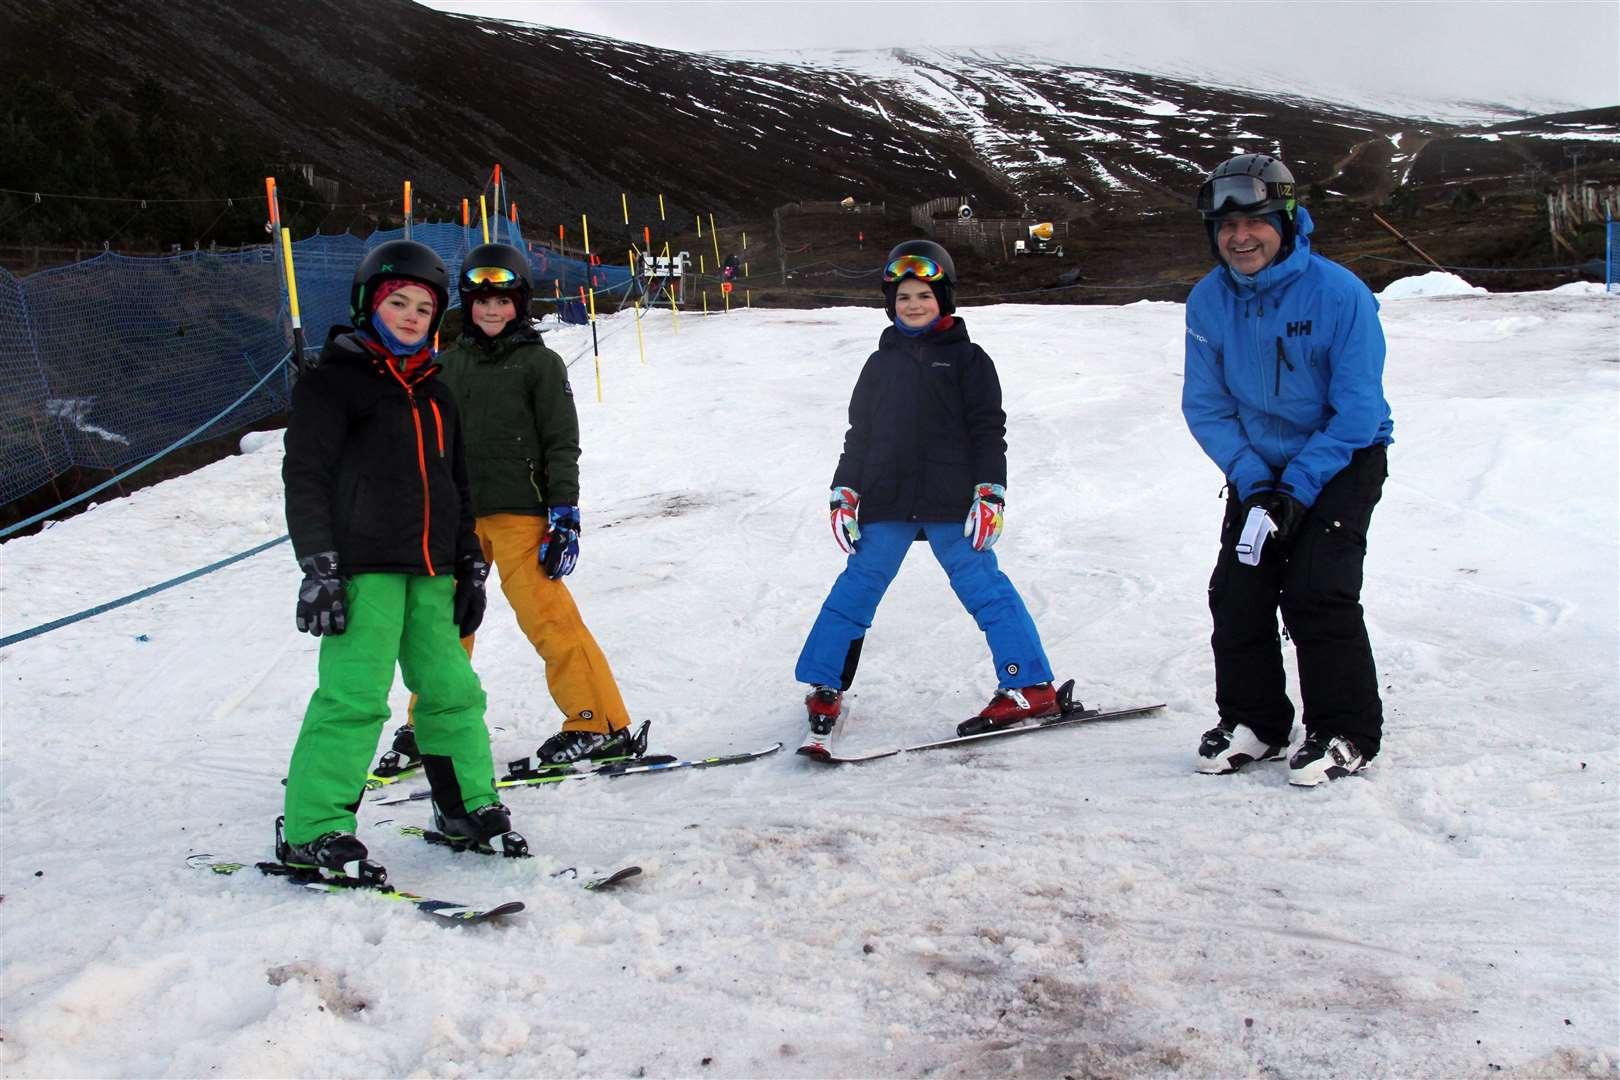 Aviemore-based Free Ski's instructor Mark Cox with three young skiers the weekend before last Christmas.